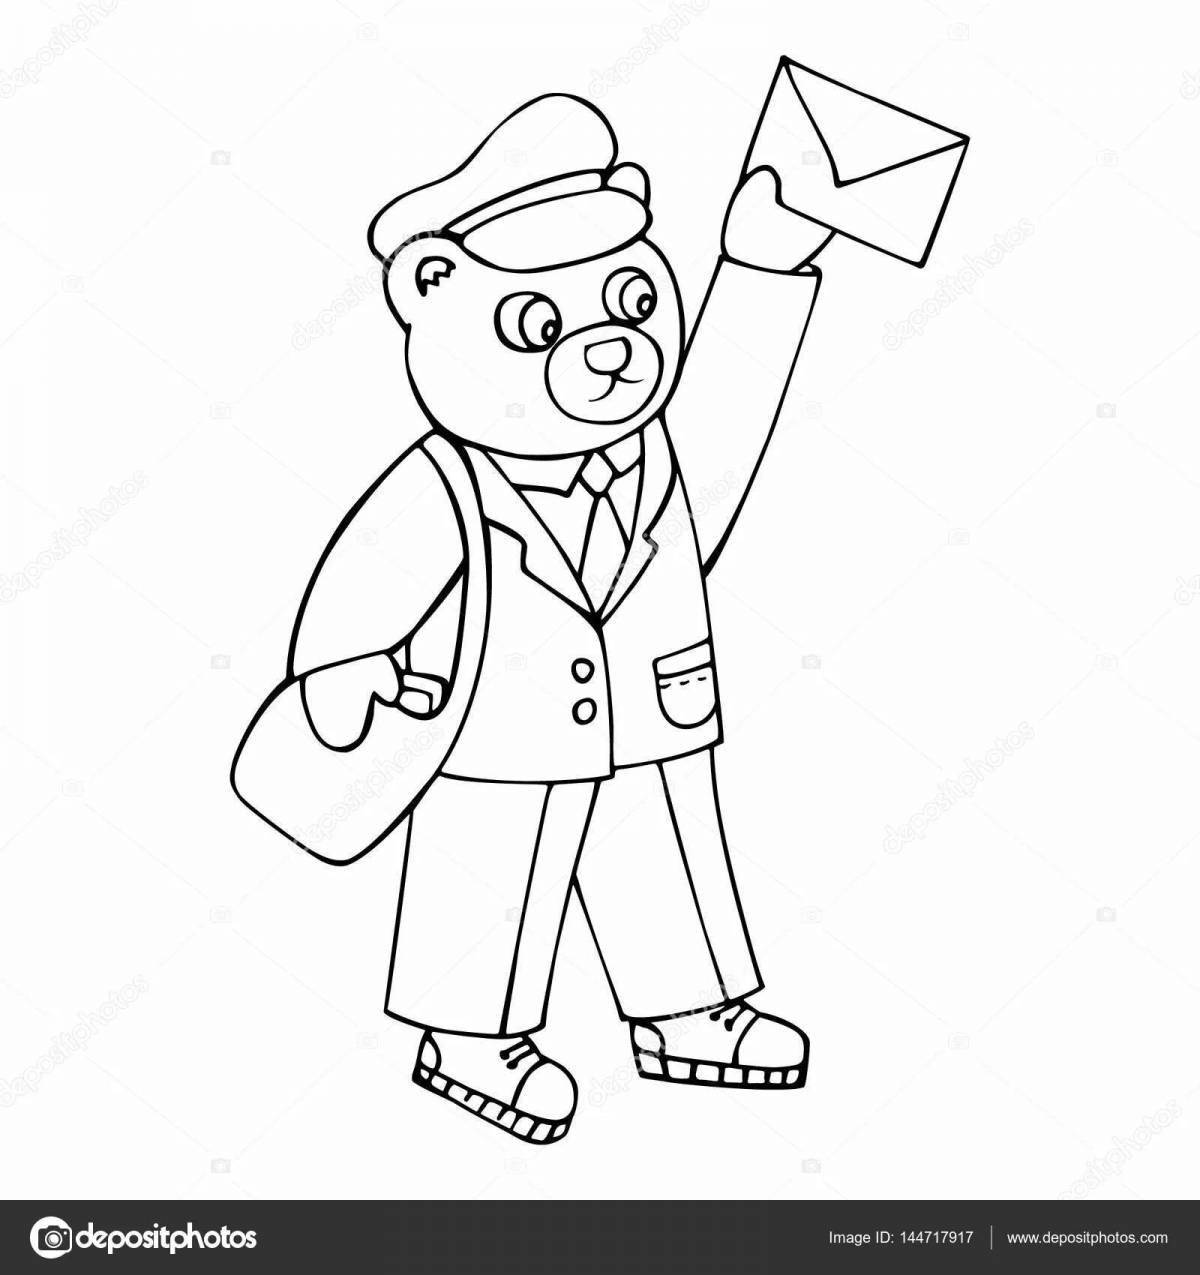 Colorful postman coloring pages for kids